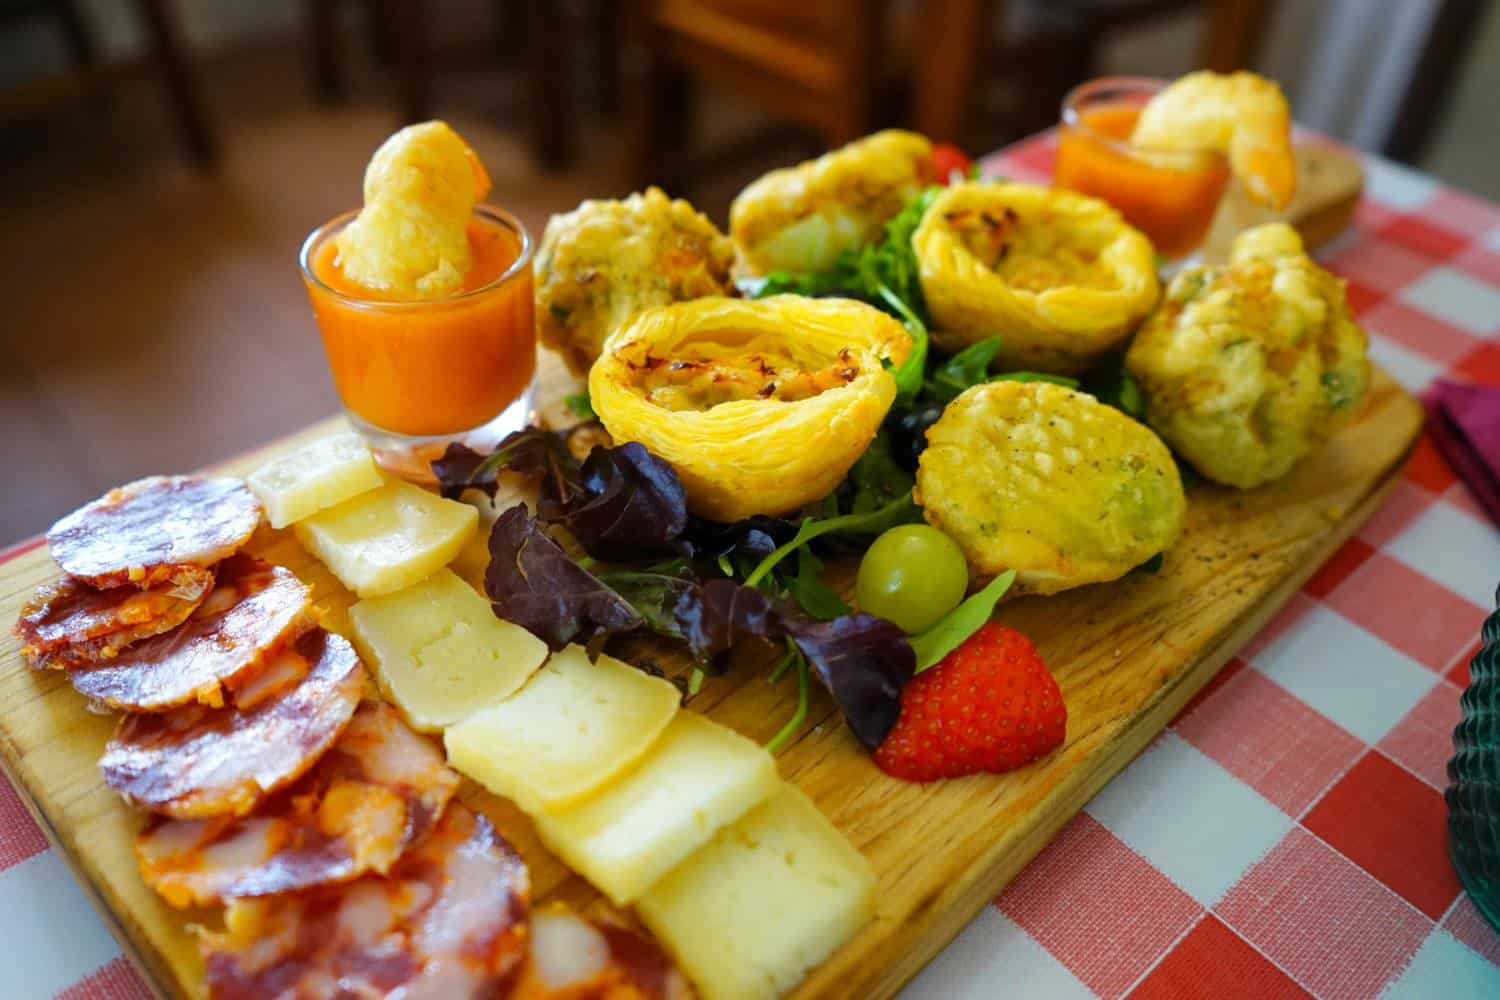 Meat, cheese, pastries, and fruit on a wooden tasting platter, sitting on a checked tablecloth